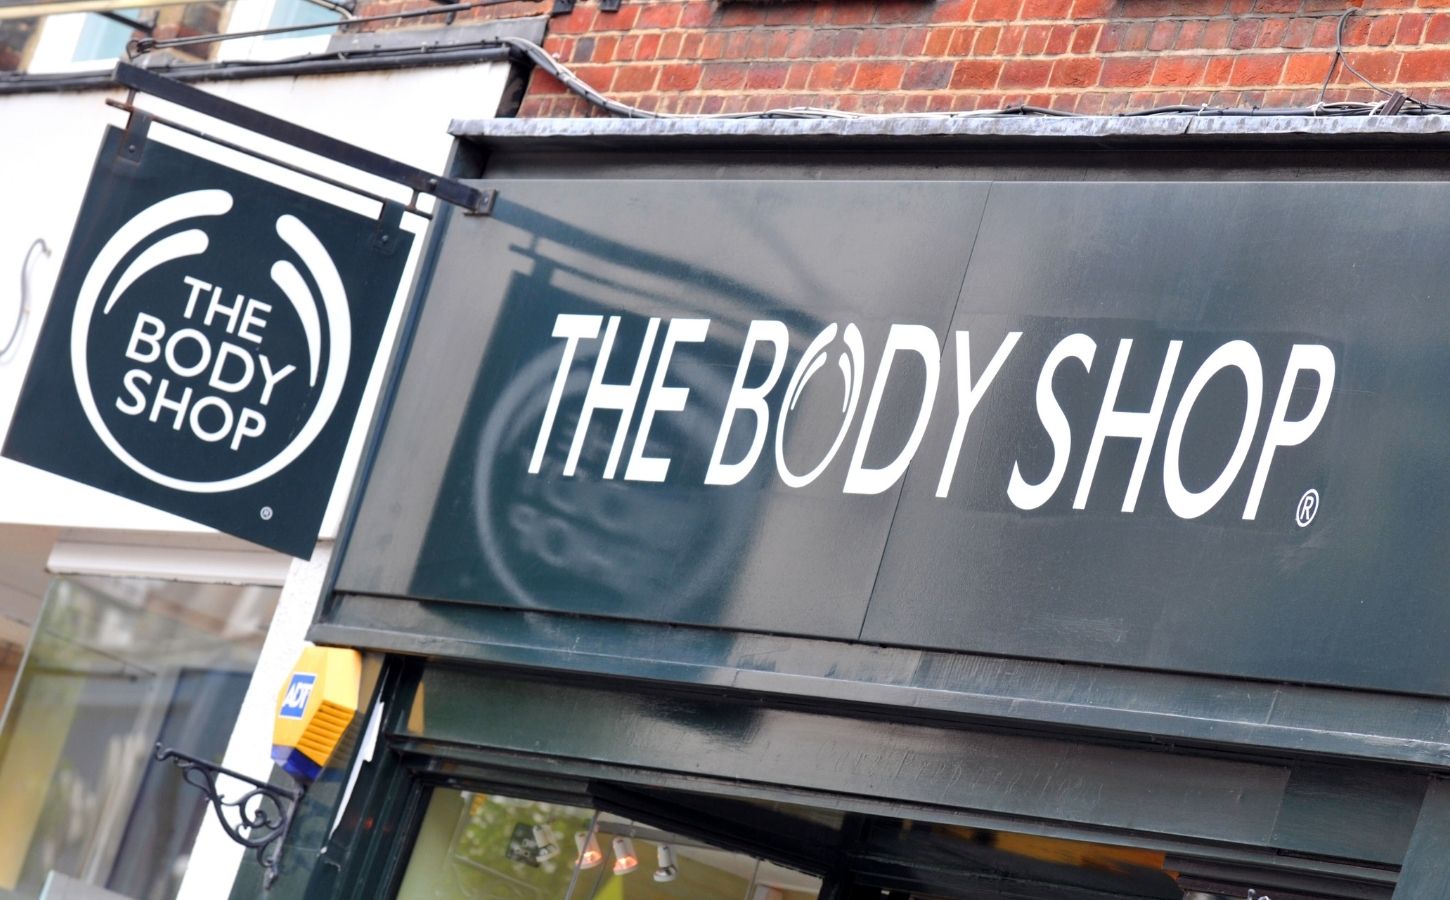 The outside of vegan-friendly beauty brand The Body Shop